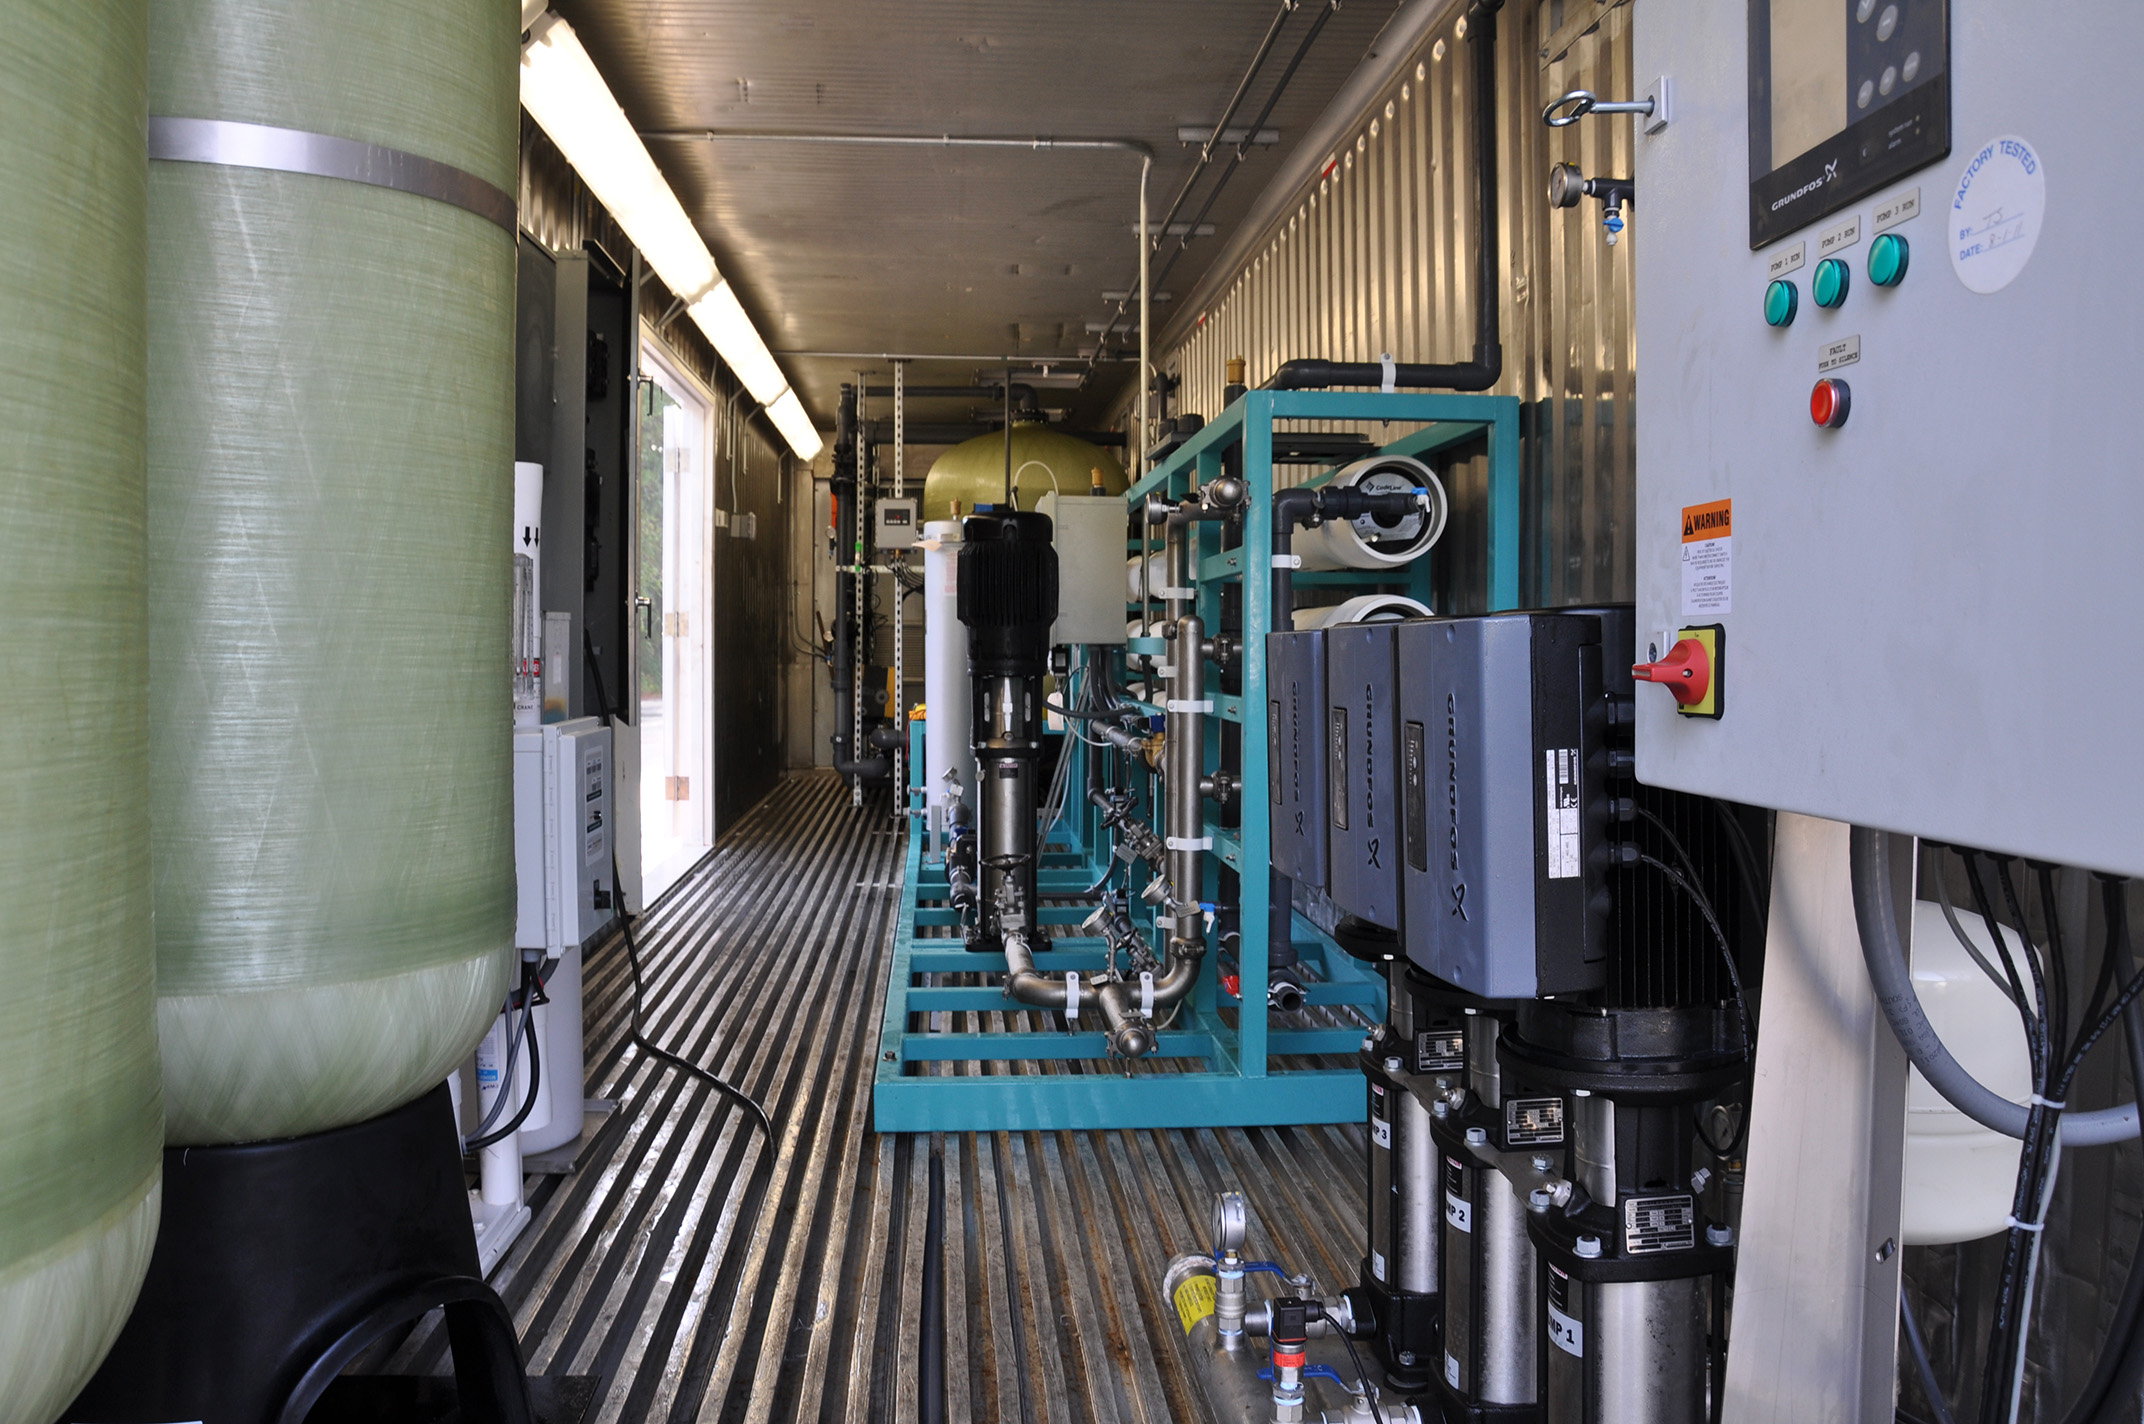 Interior view of a modular Seamega sea water desalination system including an electrical panel in the foreground across from fiberglass vessels with a cyan metal frame in the center of the image supporting a large water filter, electrical system, and various horizontally positioned filtration pipes within a metal shipping container style housing, a larger vessel stands in the back of the container